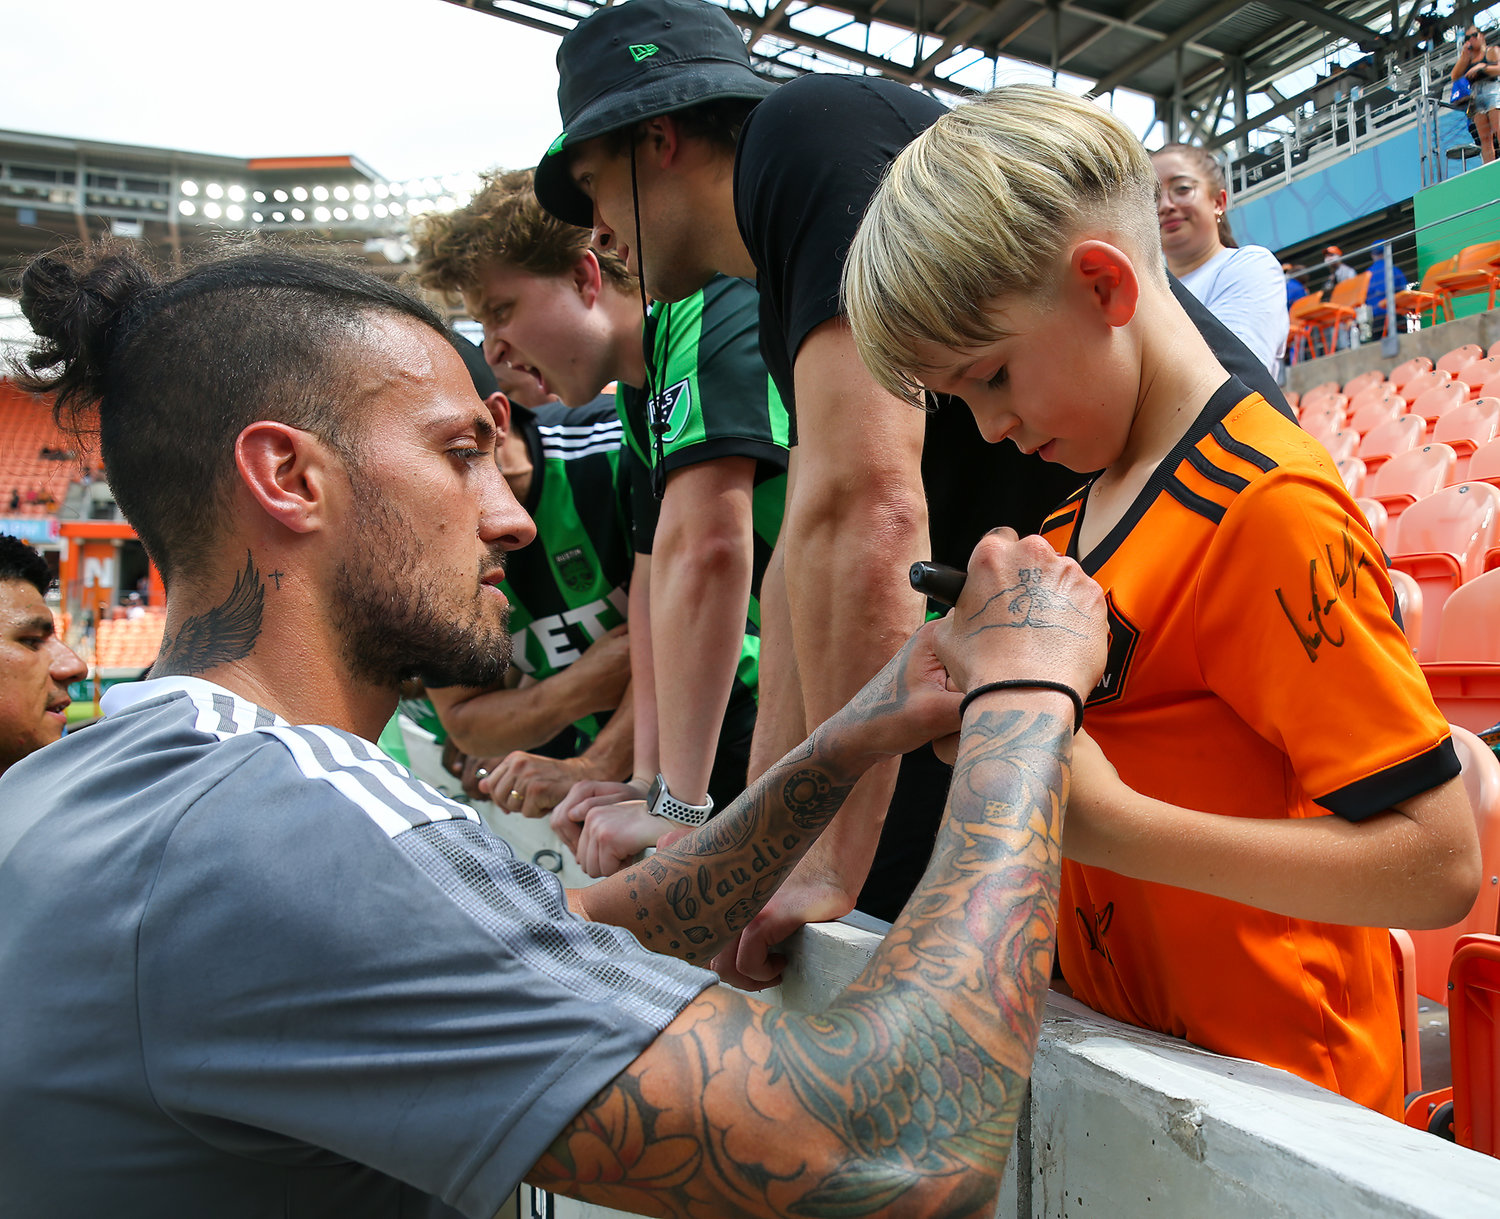 Austin FC forward Maximiliano Urruti (37), who played last year for the Houston Dynamo, signs a young Houston fan’s jersey after a Major League Soccer match on April 30, 2022 in Houston, Texas.